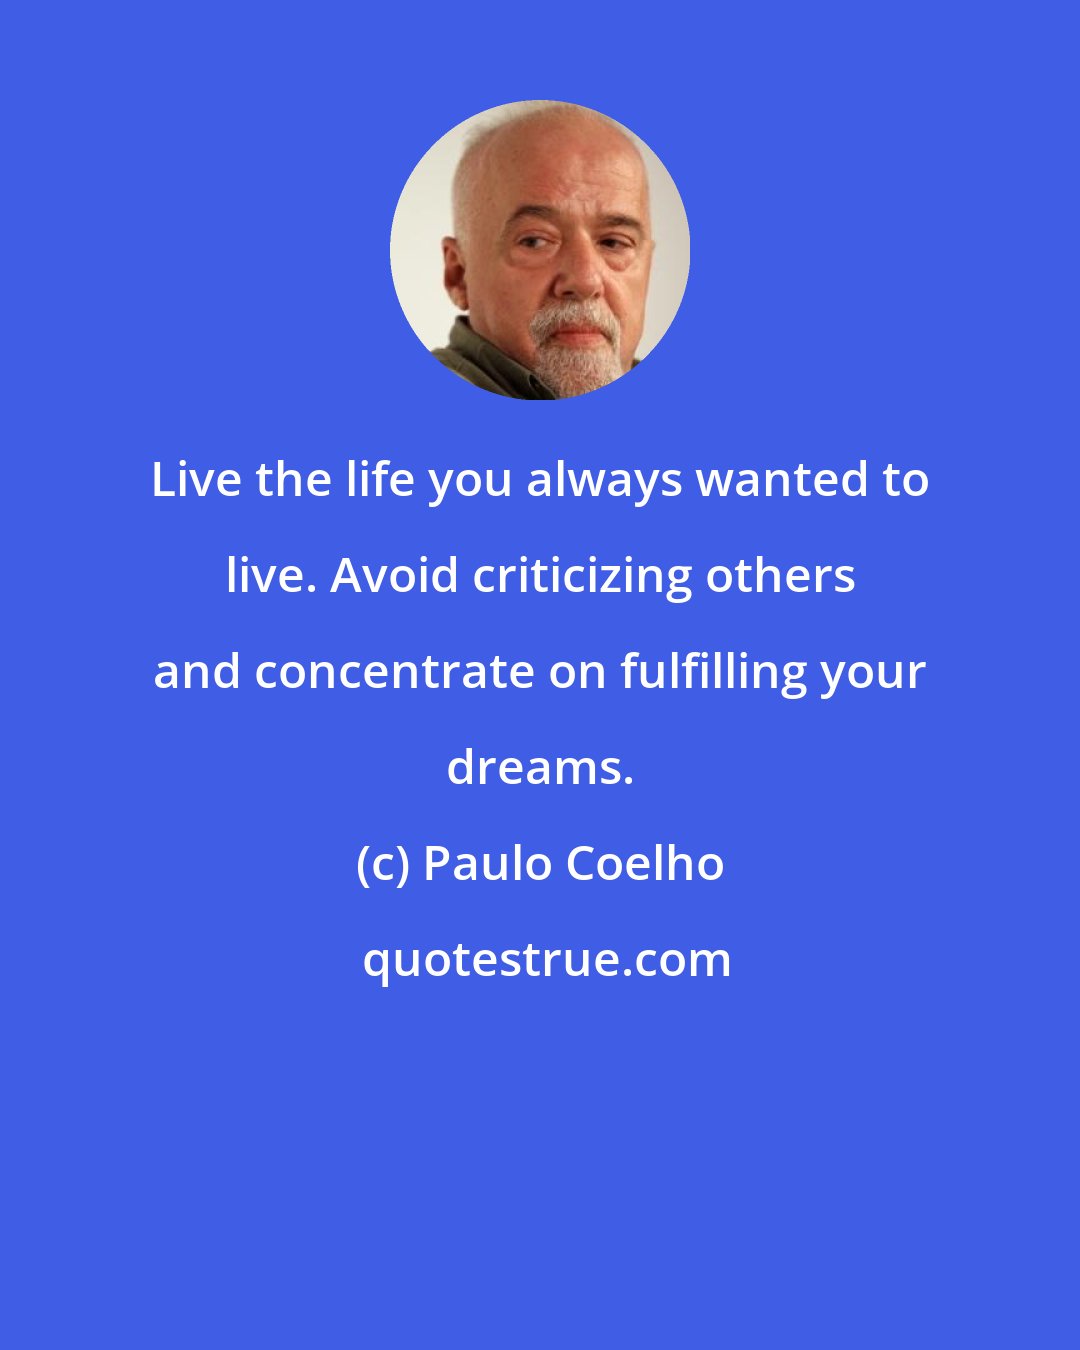 Paulo Coelho: Live the life you always wanted to live. Avoid criticizing others and concentrate on fulfilling your dreams.